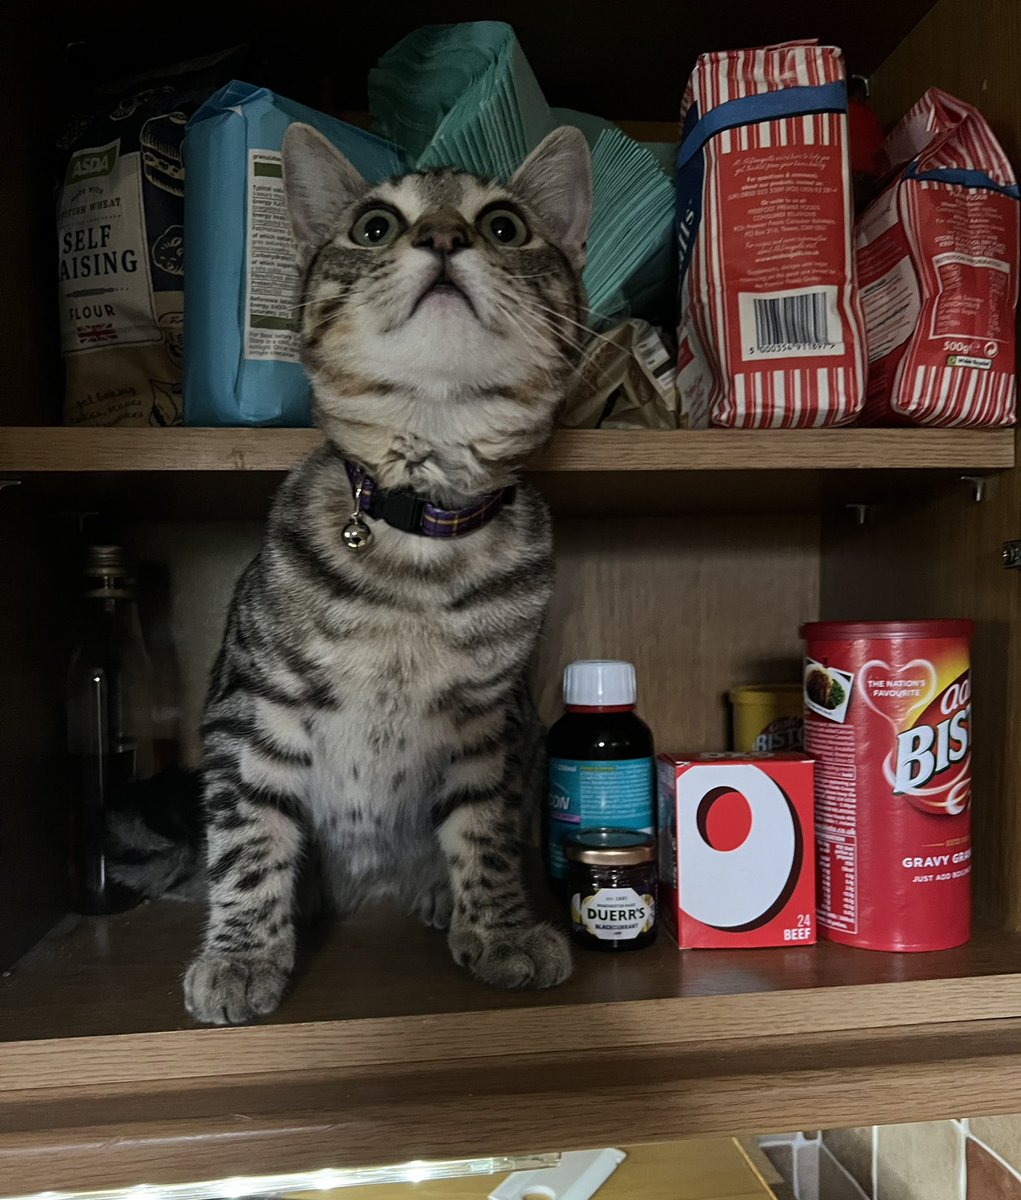 RT @TheVicarageCat: Mum wants to know which shelf you all store your cats on?  #CatsOfTwitter https://t.co/OuNqbhhr6k